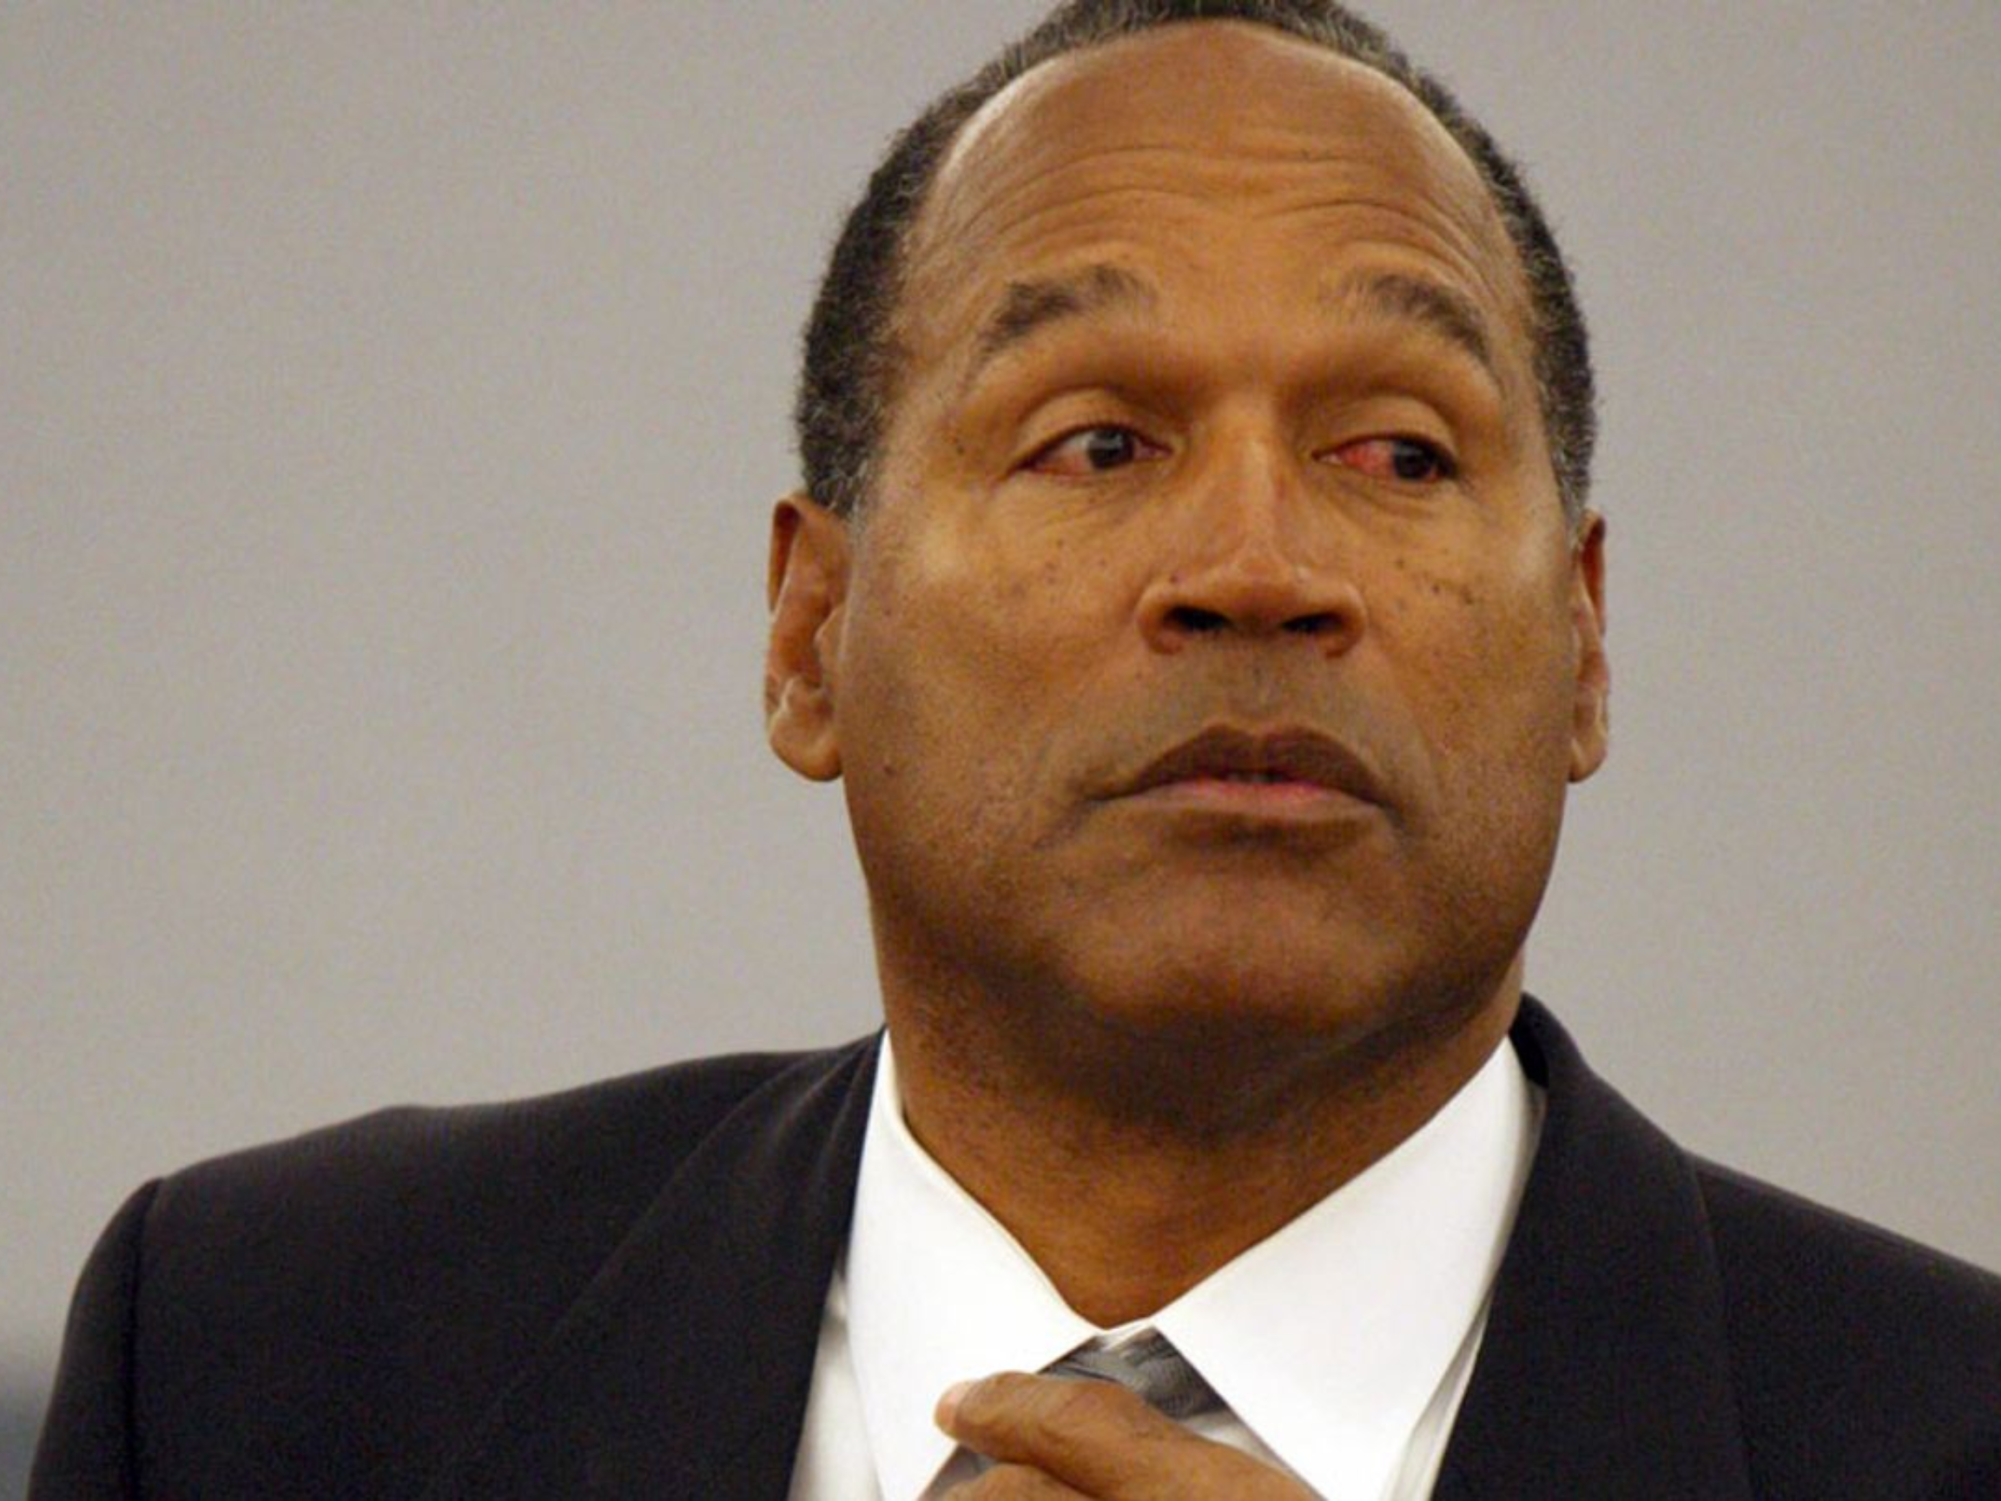 After a battle with prostate cancer, Orenthal James “OJ Simpson passed away April 10. The polarizing figure’s death comes mere months after he proclaimed his good health on social media, causing fans to wonder the extent of the severity of his illness. Simpson, who famously attained an acquittal after facing charges of killing his ex-wife, still stands as a controversial character in not only the American justice system but in American pop culture. 
